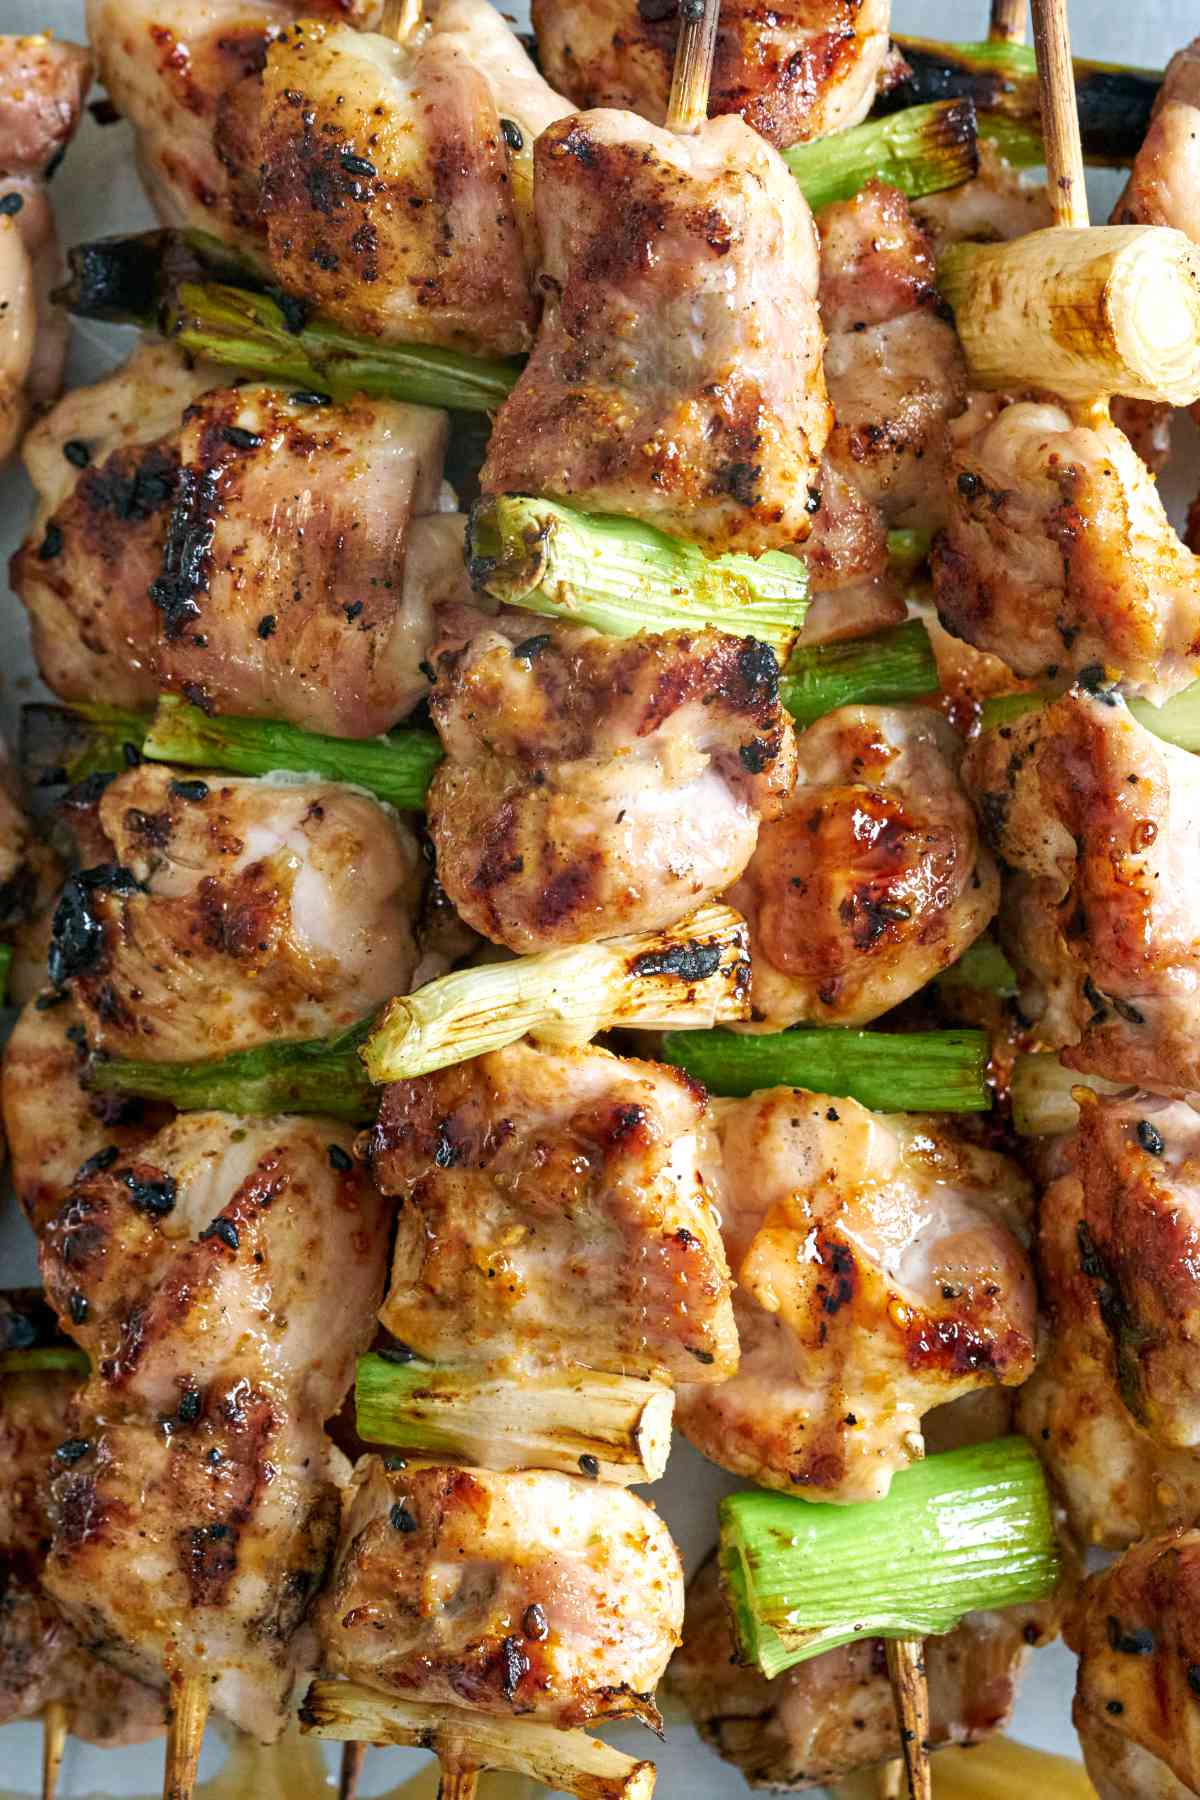 Chicken kabobs on skewers with scallions.